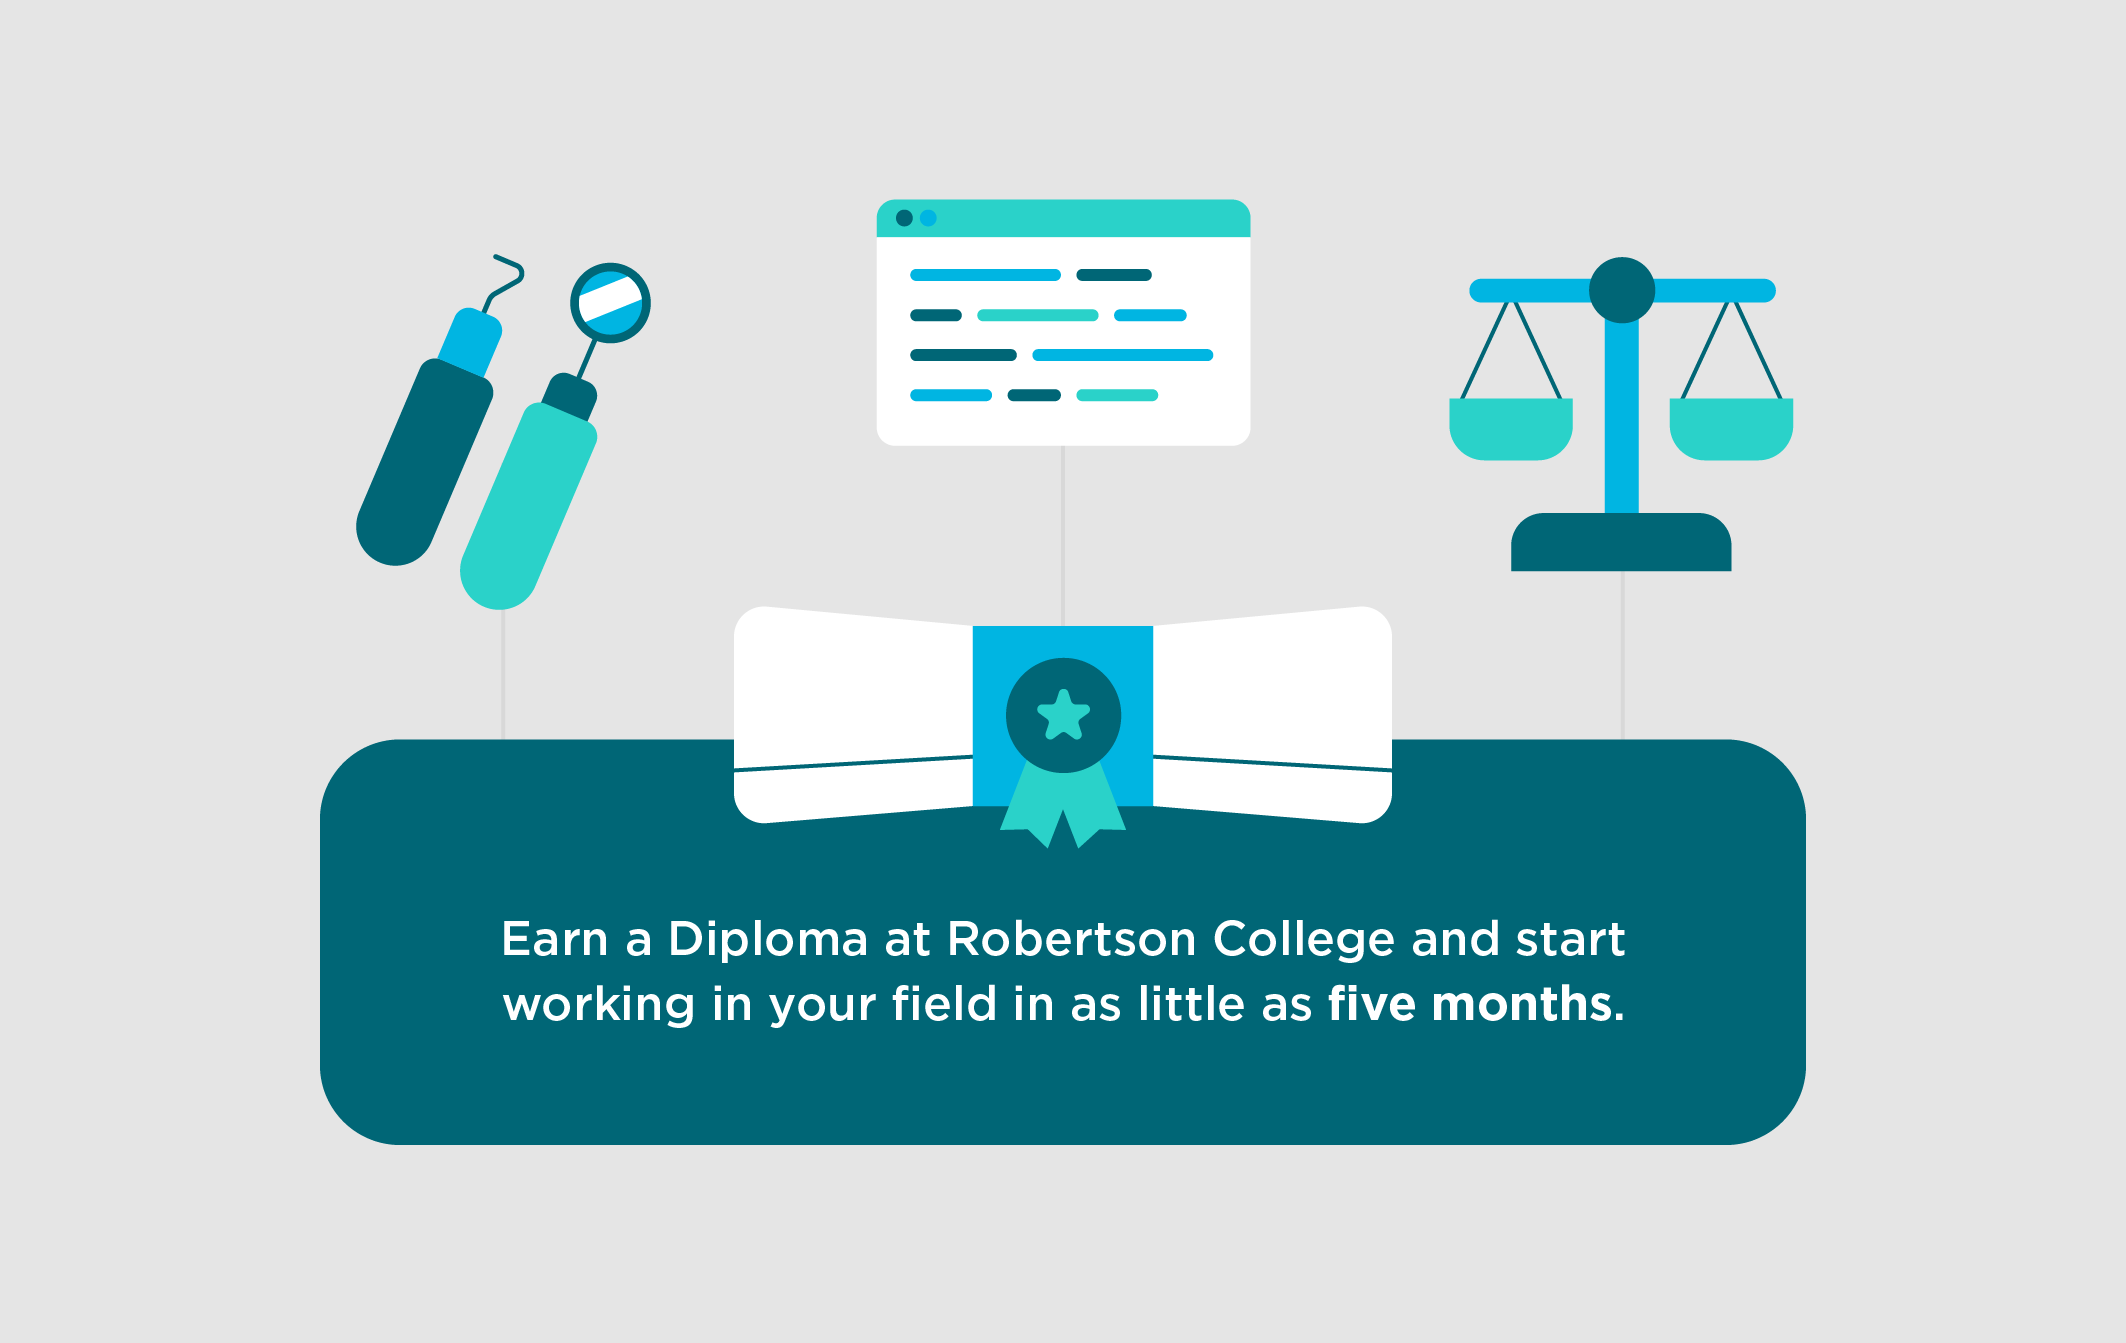 Image describing how Robertson College students can earn a diploma in five months. 